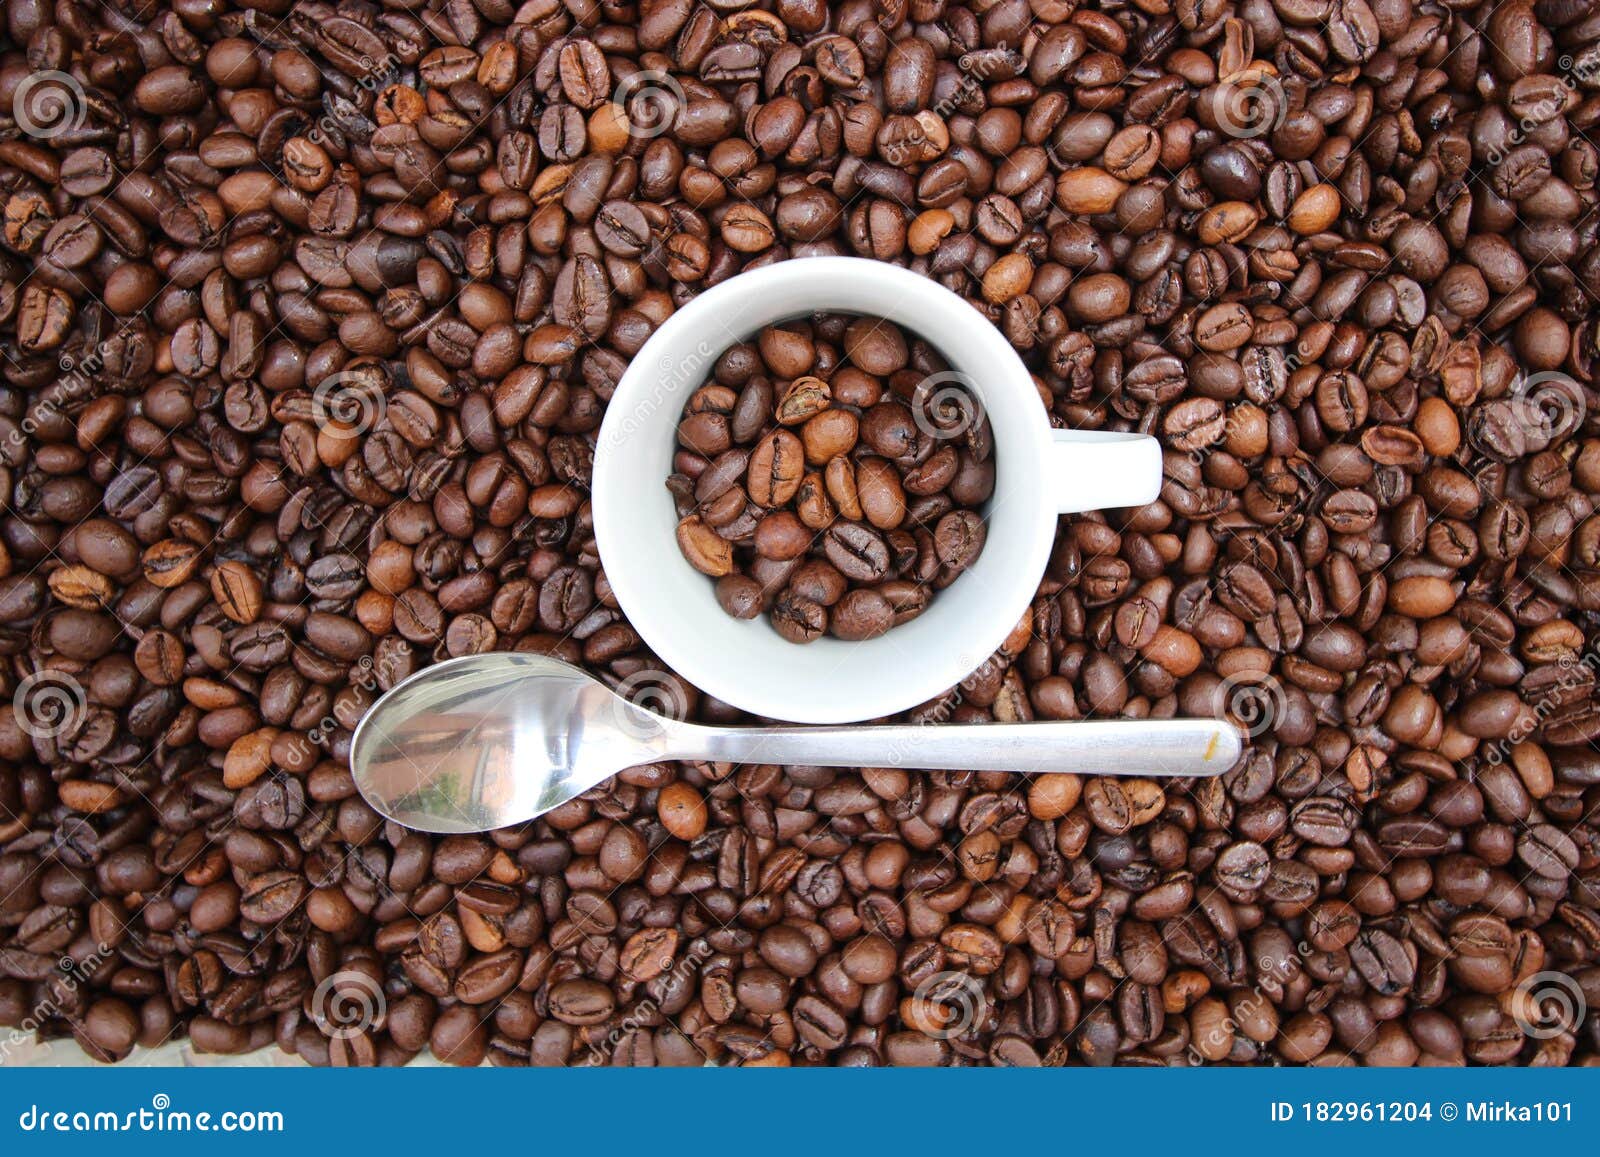 background with many coffee beans.